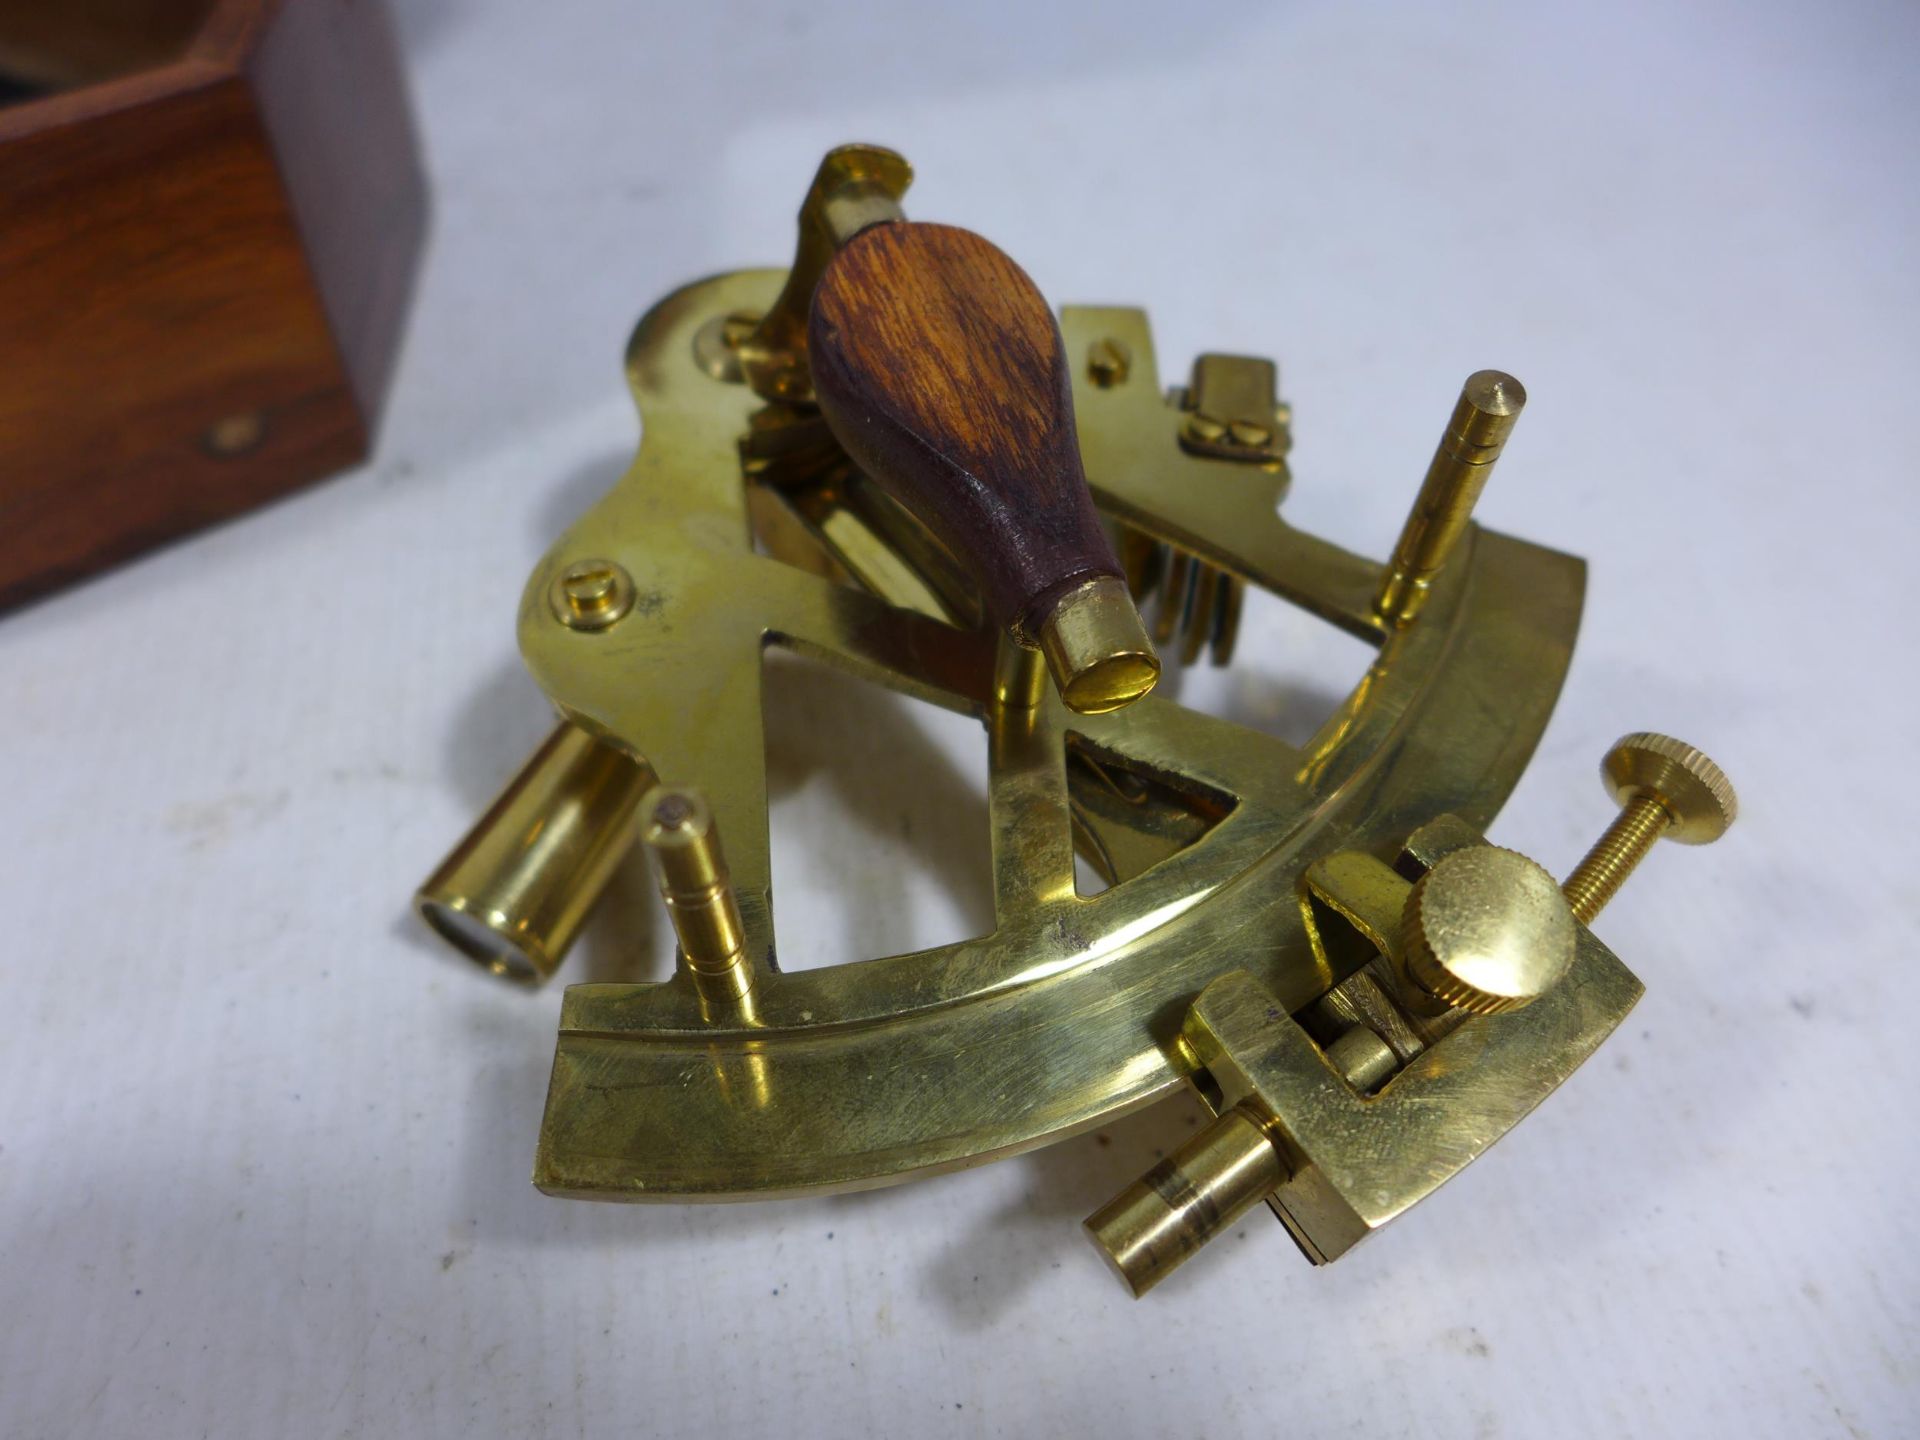 A CASED SMALL BRASS SEXTANT - Image 4 of 4